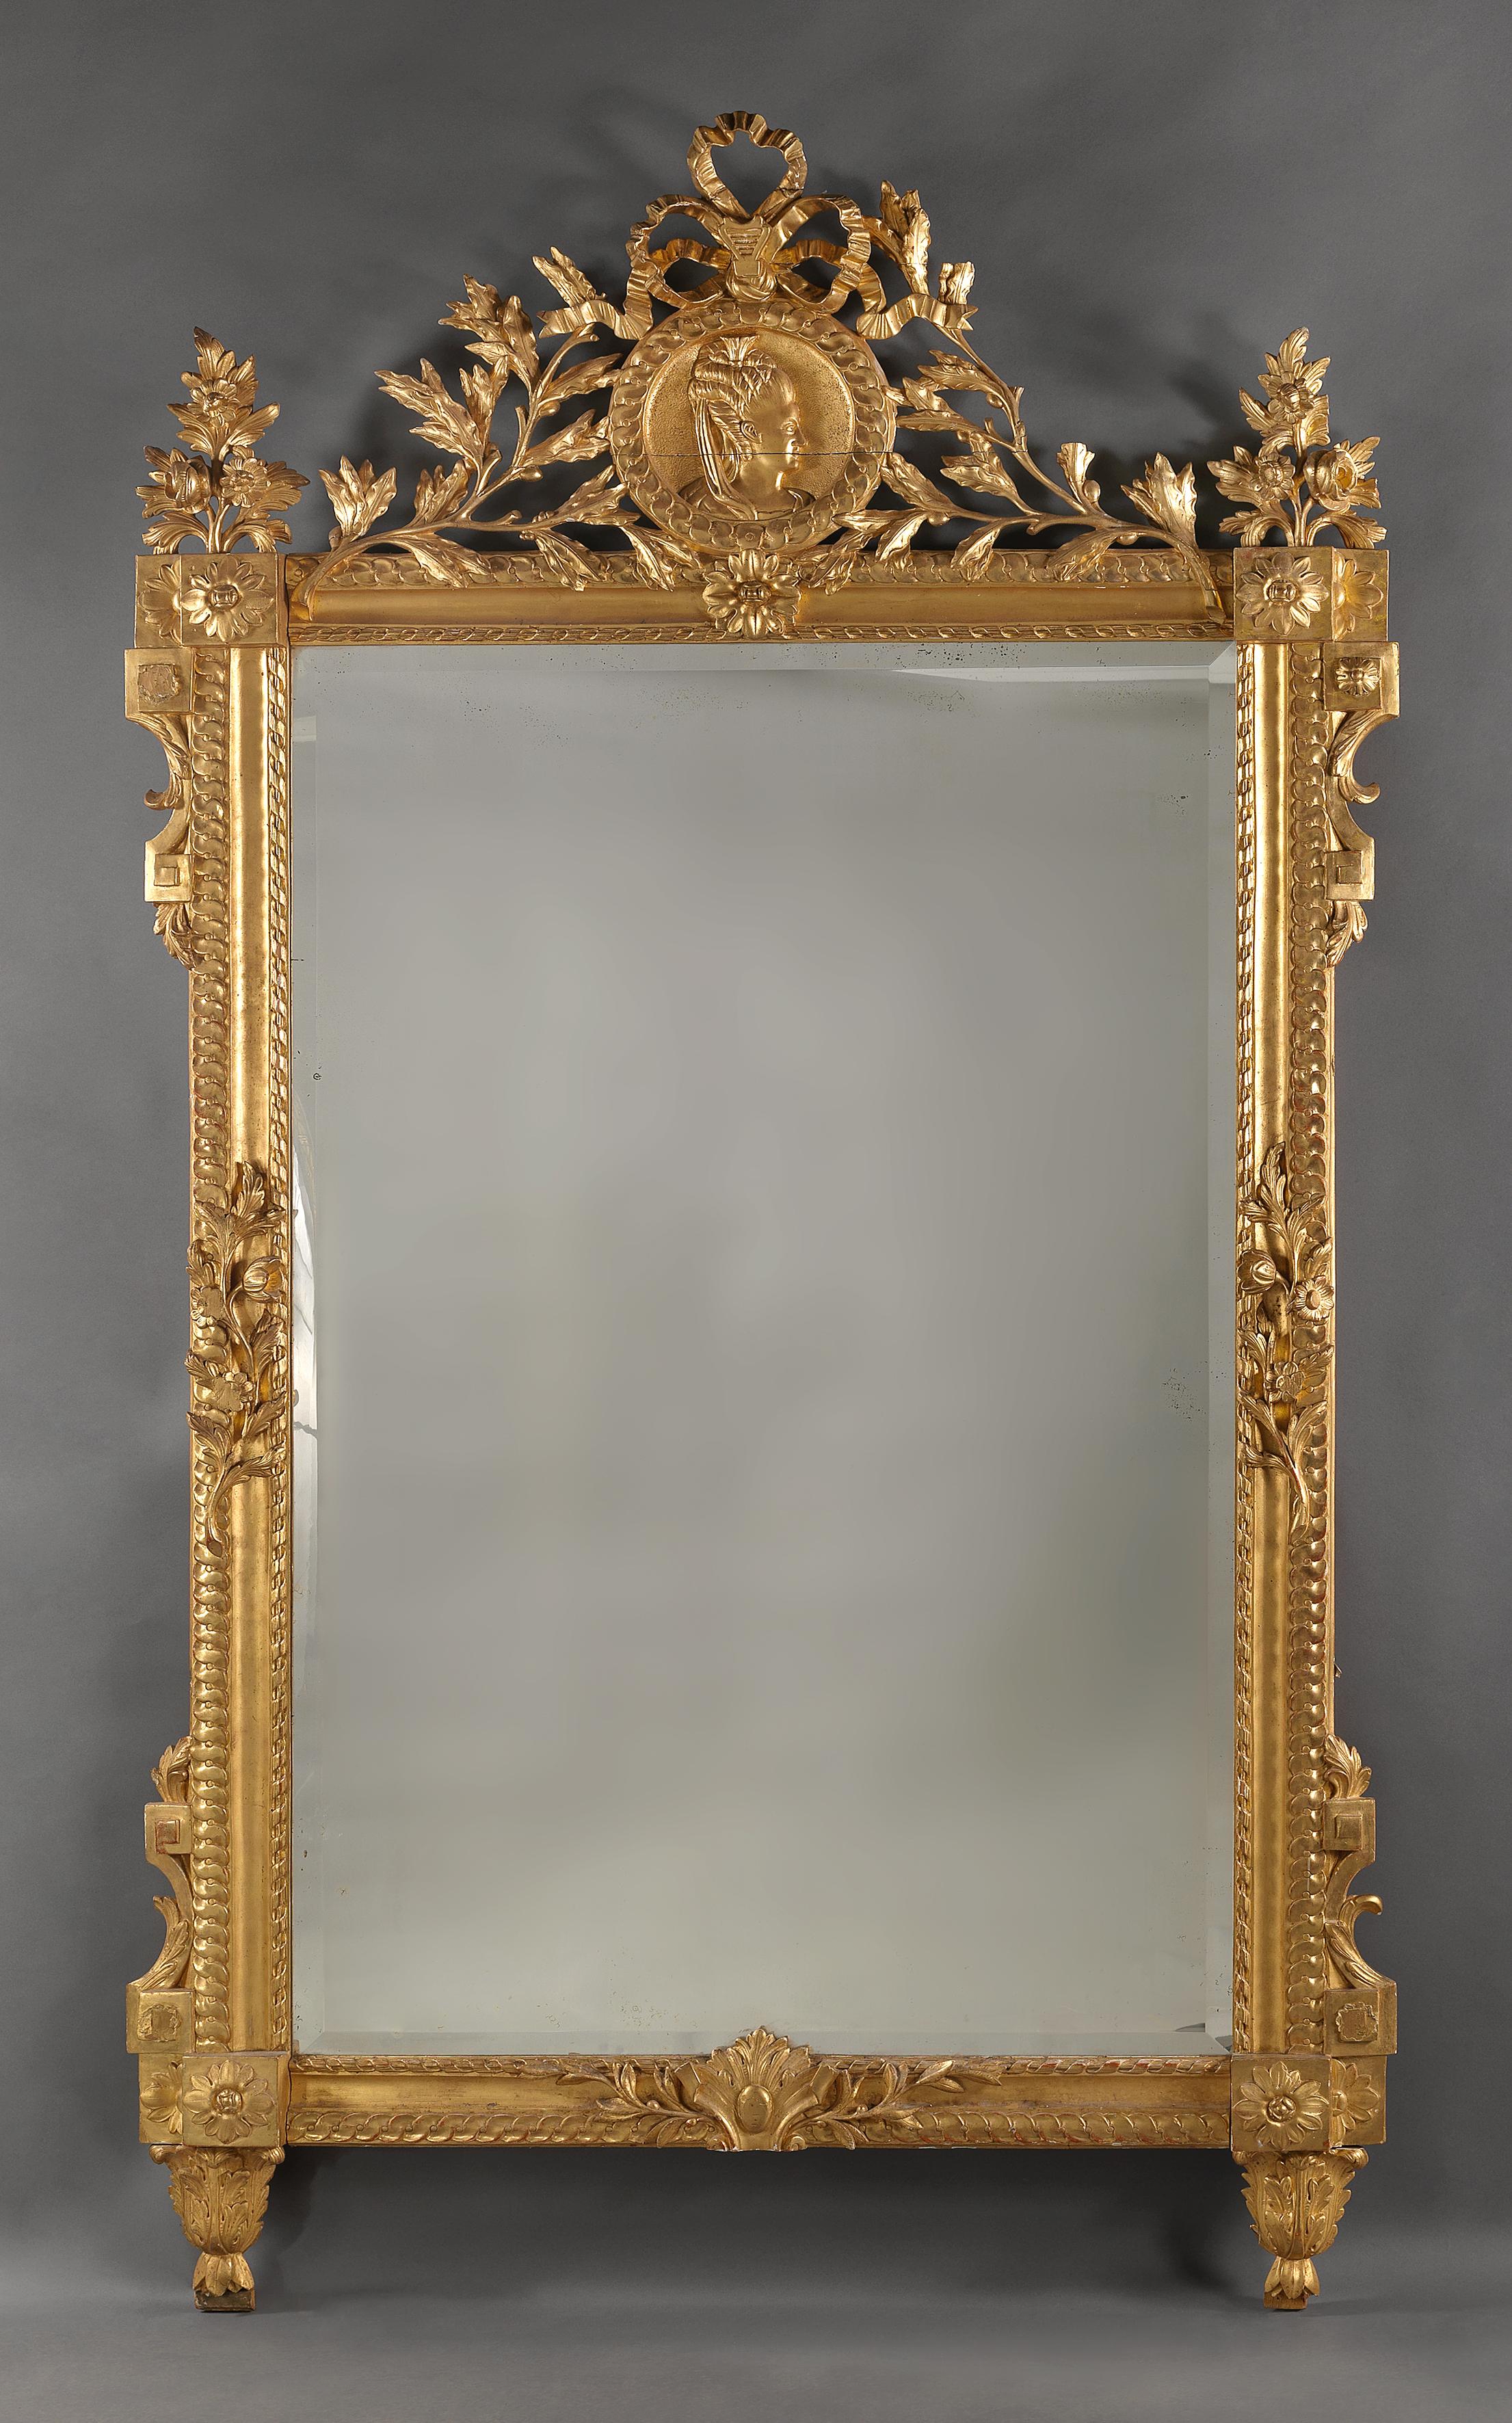 A fine Louis XVI style carved giltwood mirror, the cresting carved with a portrait roundel of a young woman in profile.

French, circa 1890. 

This impressive mirror is richly carved with a ribbon tied laurel cresting centred by a guilloche